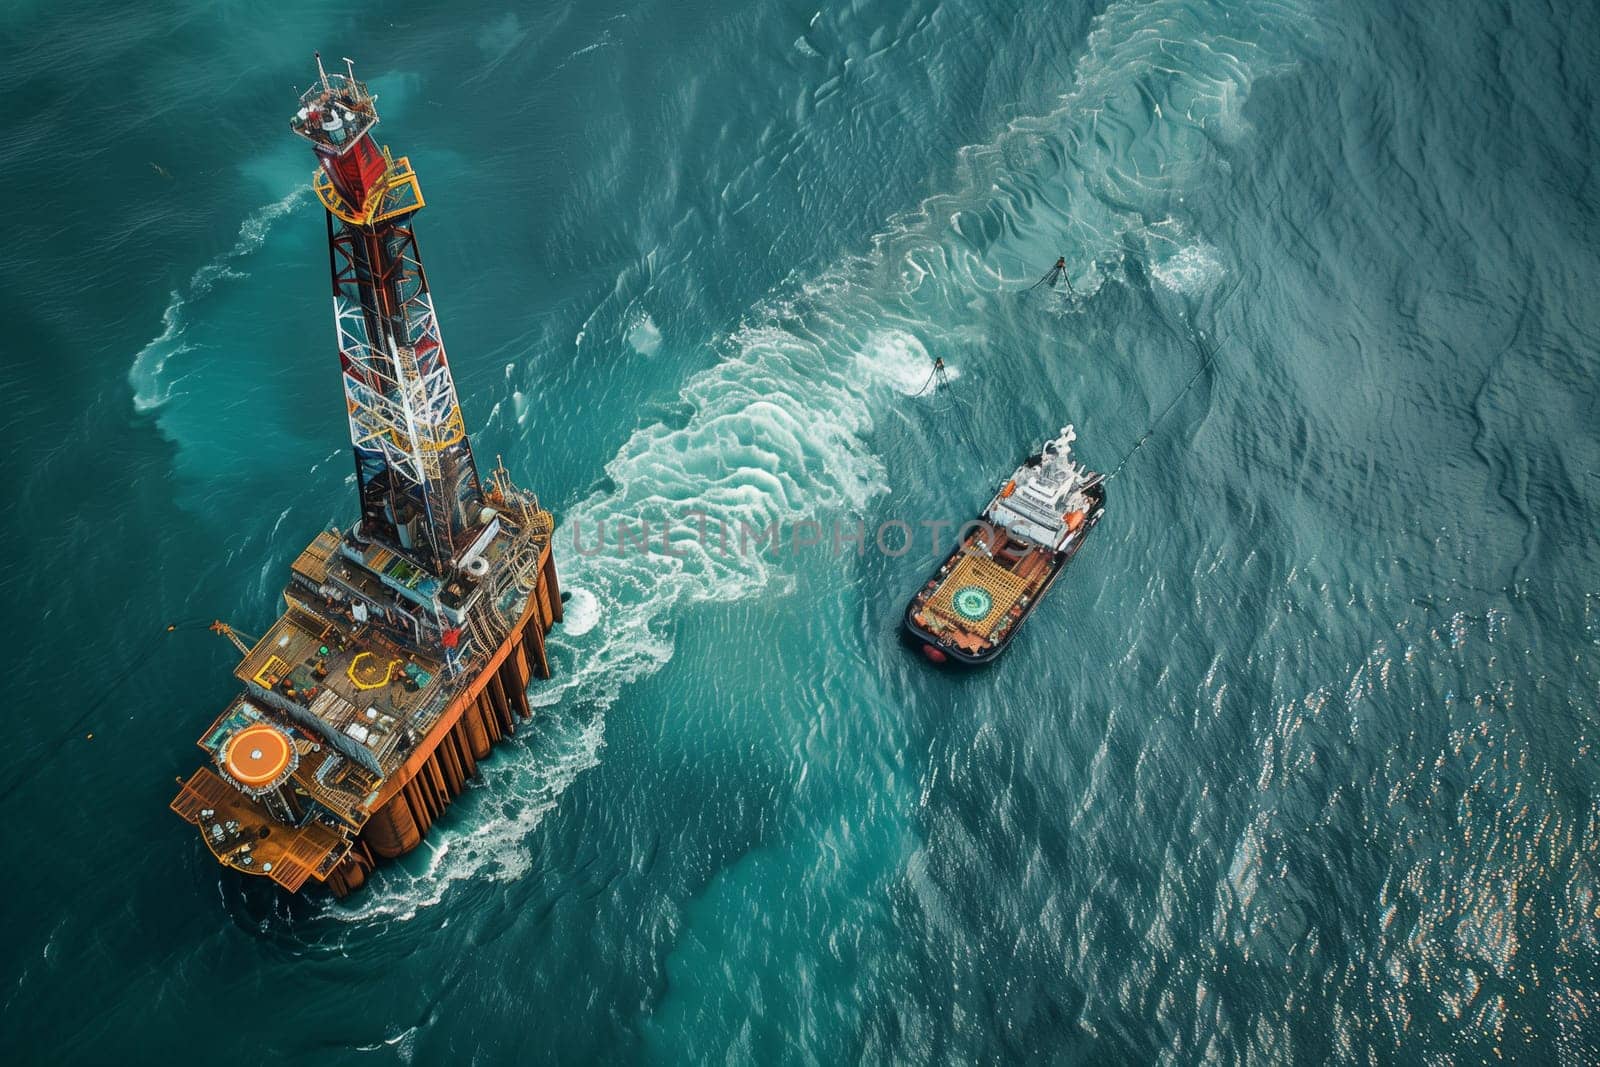 An offshore oil rig is stationed in open sea, while a tugboat maneuvers nearby, creating ripples in the water.